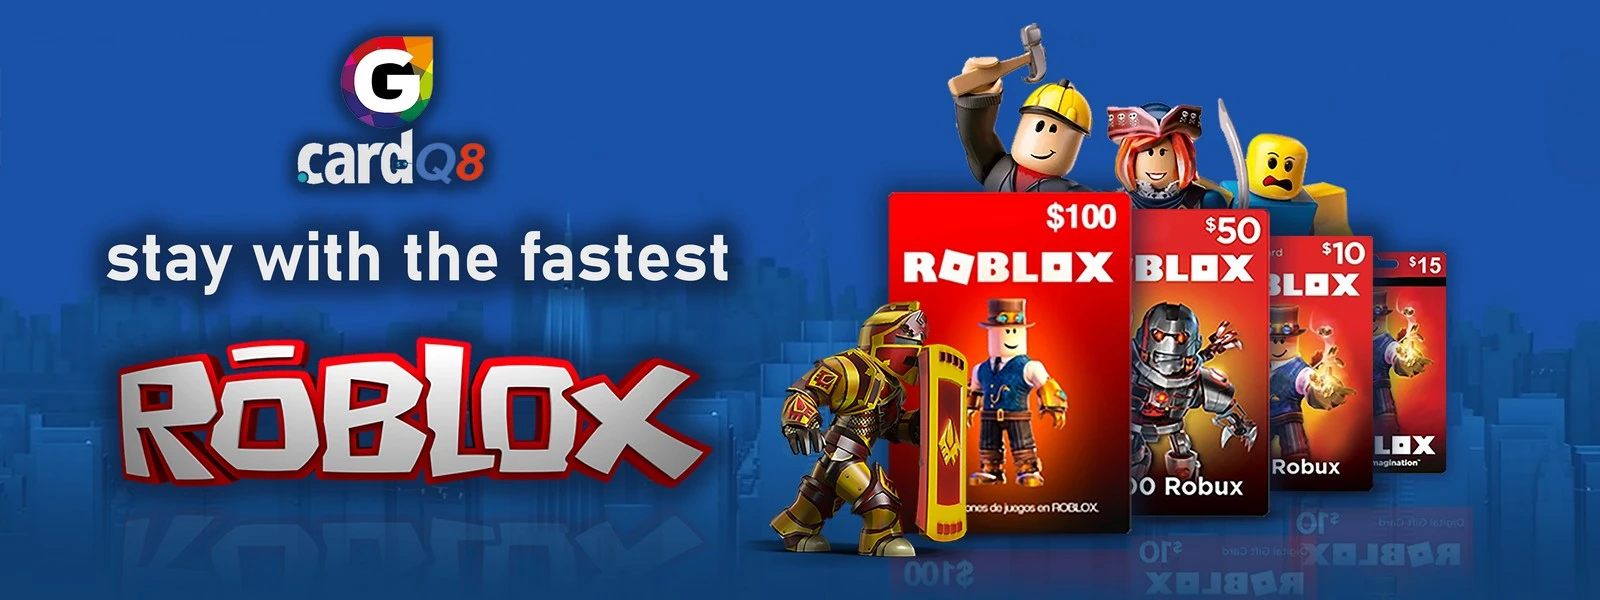 roblox cards